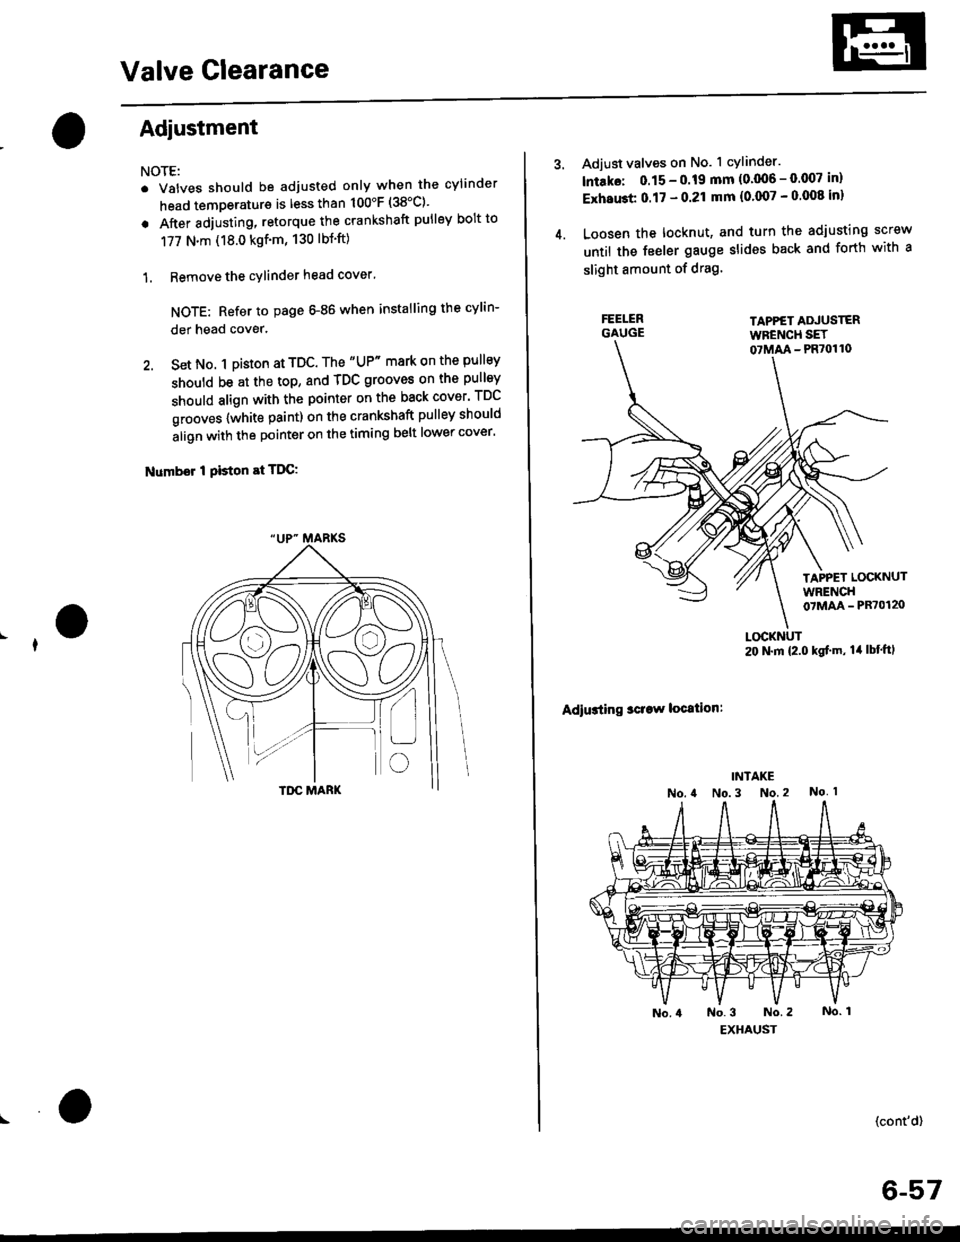 HONDA CIVIC 1998 6.G Service Manual Valve Glearance
Adjustment
NOTE:
. Valves should be adjusted only when the cylinder
head temperaturs is less than 100F (38C)
. After adjusting, retorque the crankshaft pulley bolt to
177 N.m (18.0 